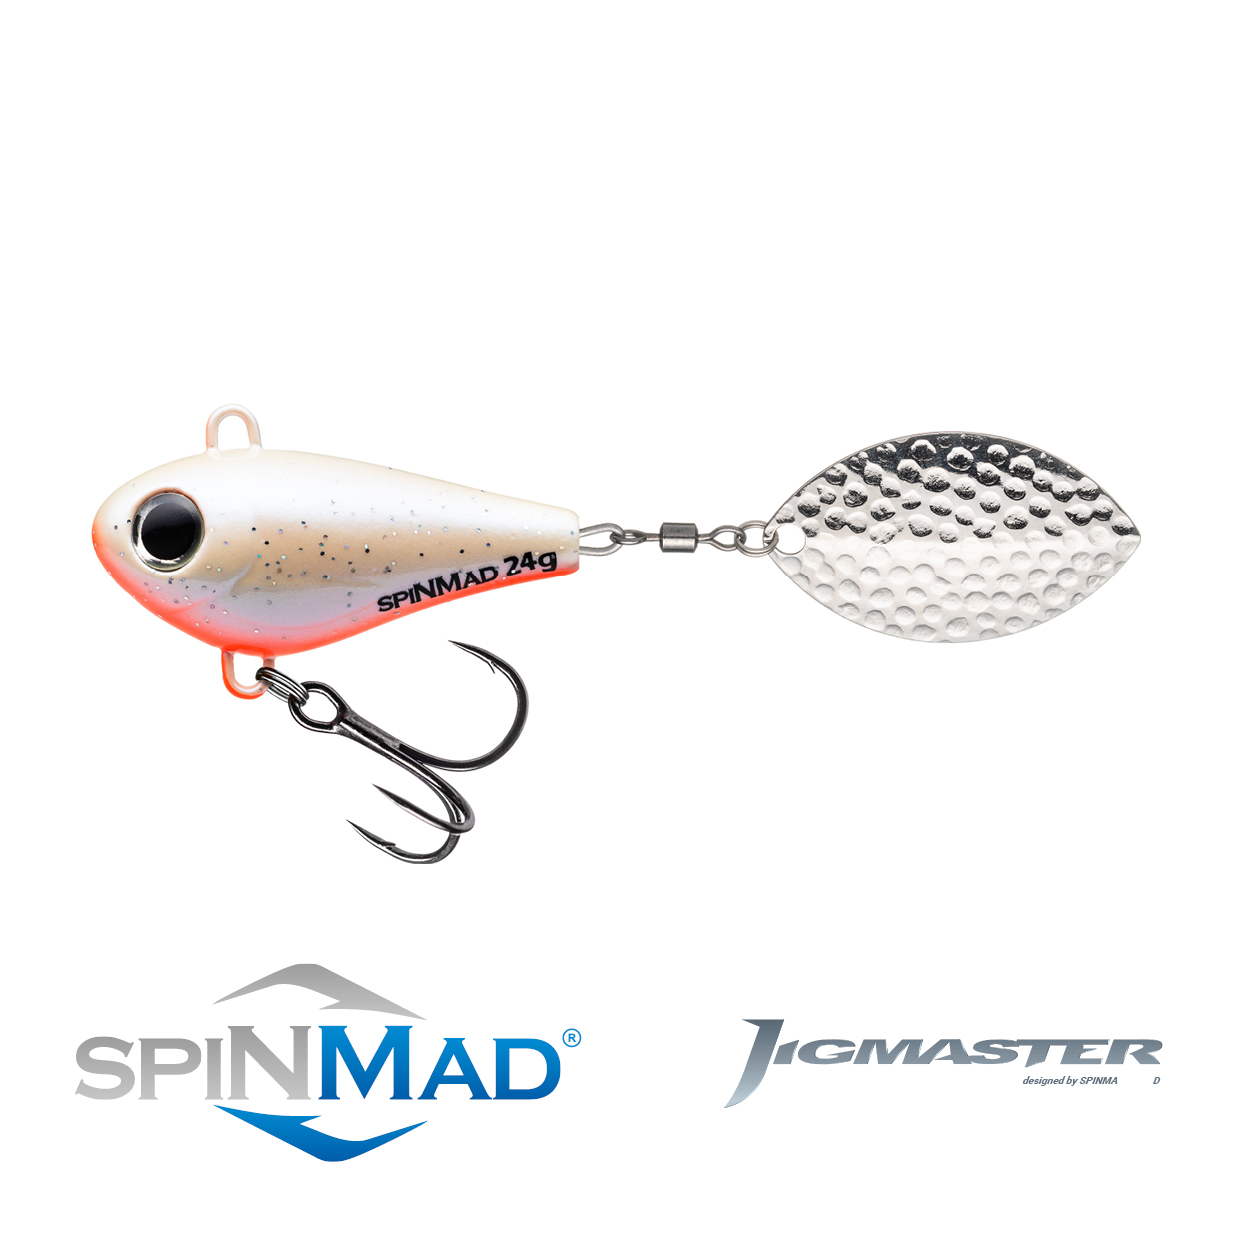 1515 Spinmad jigmaster 24g color